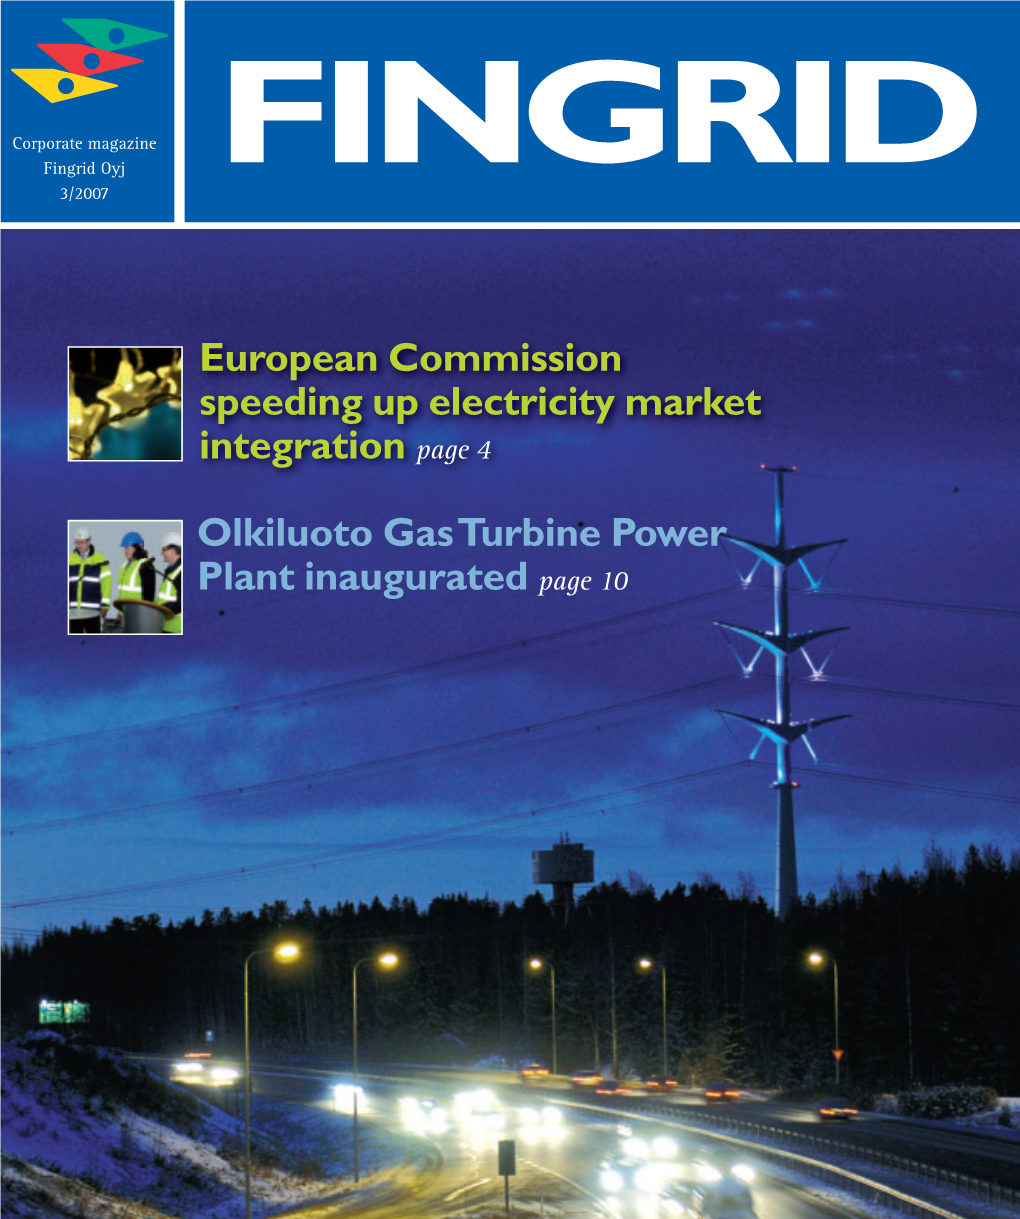 European Commission Speeding up Electricity Market Integration Page 4